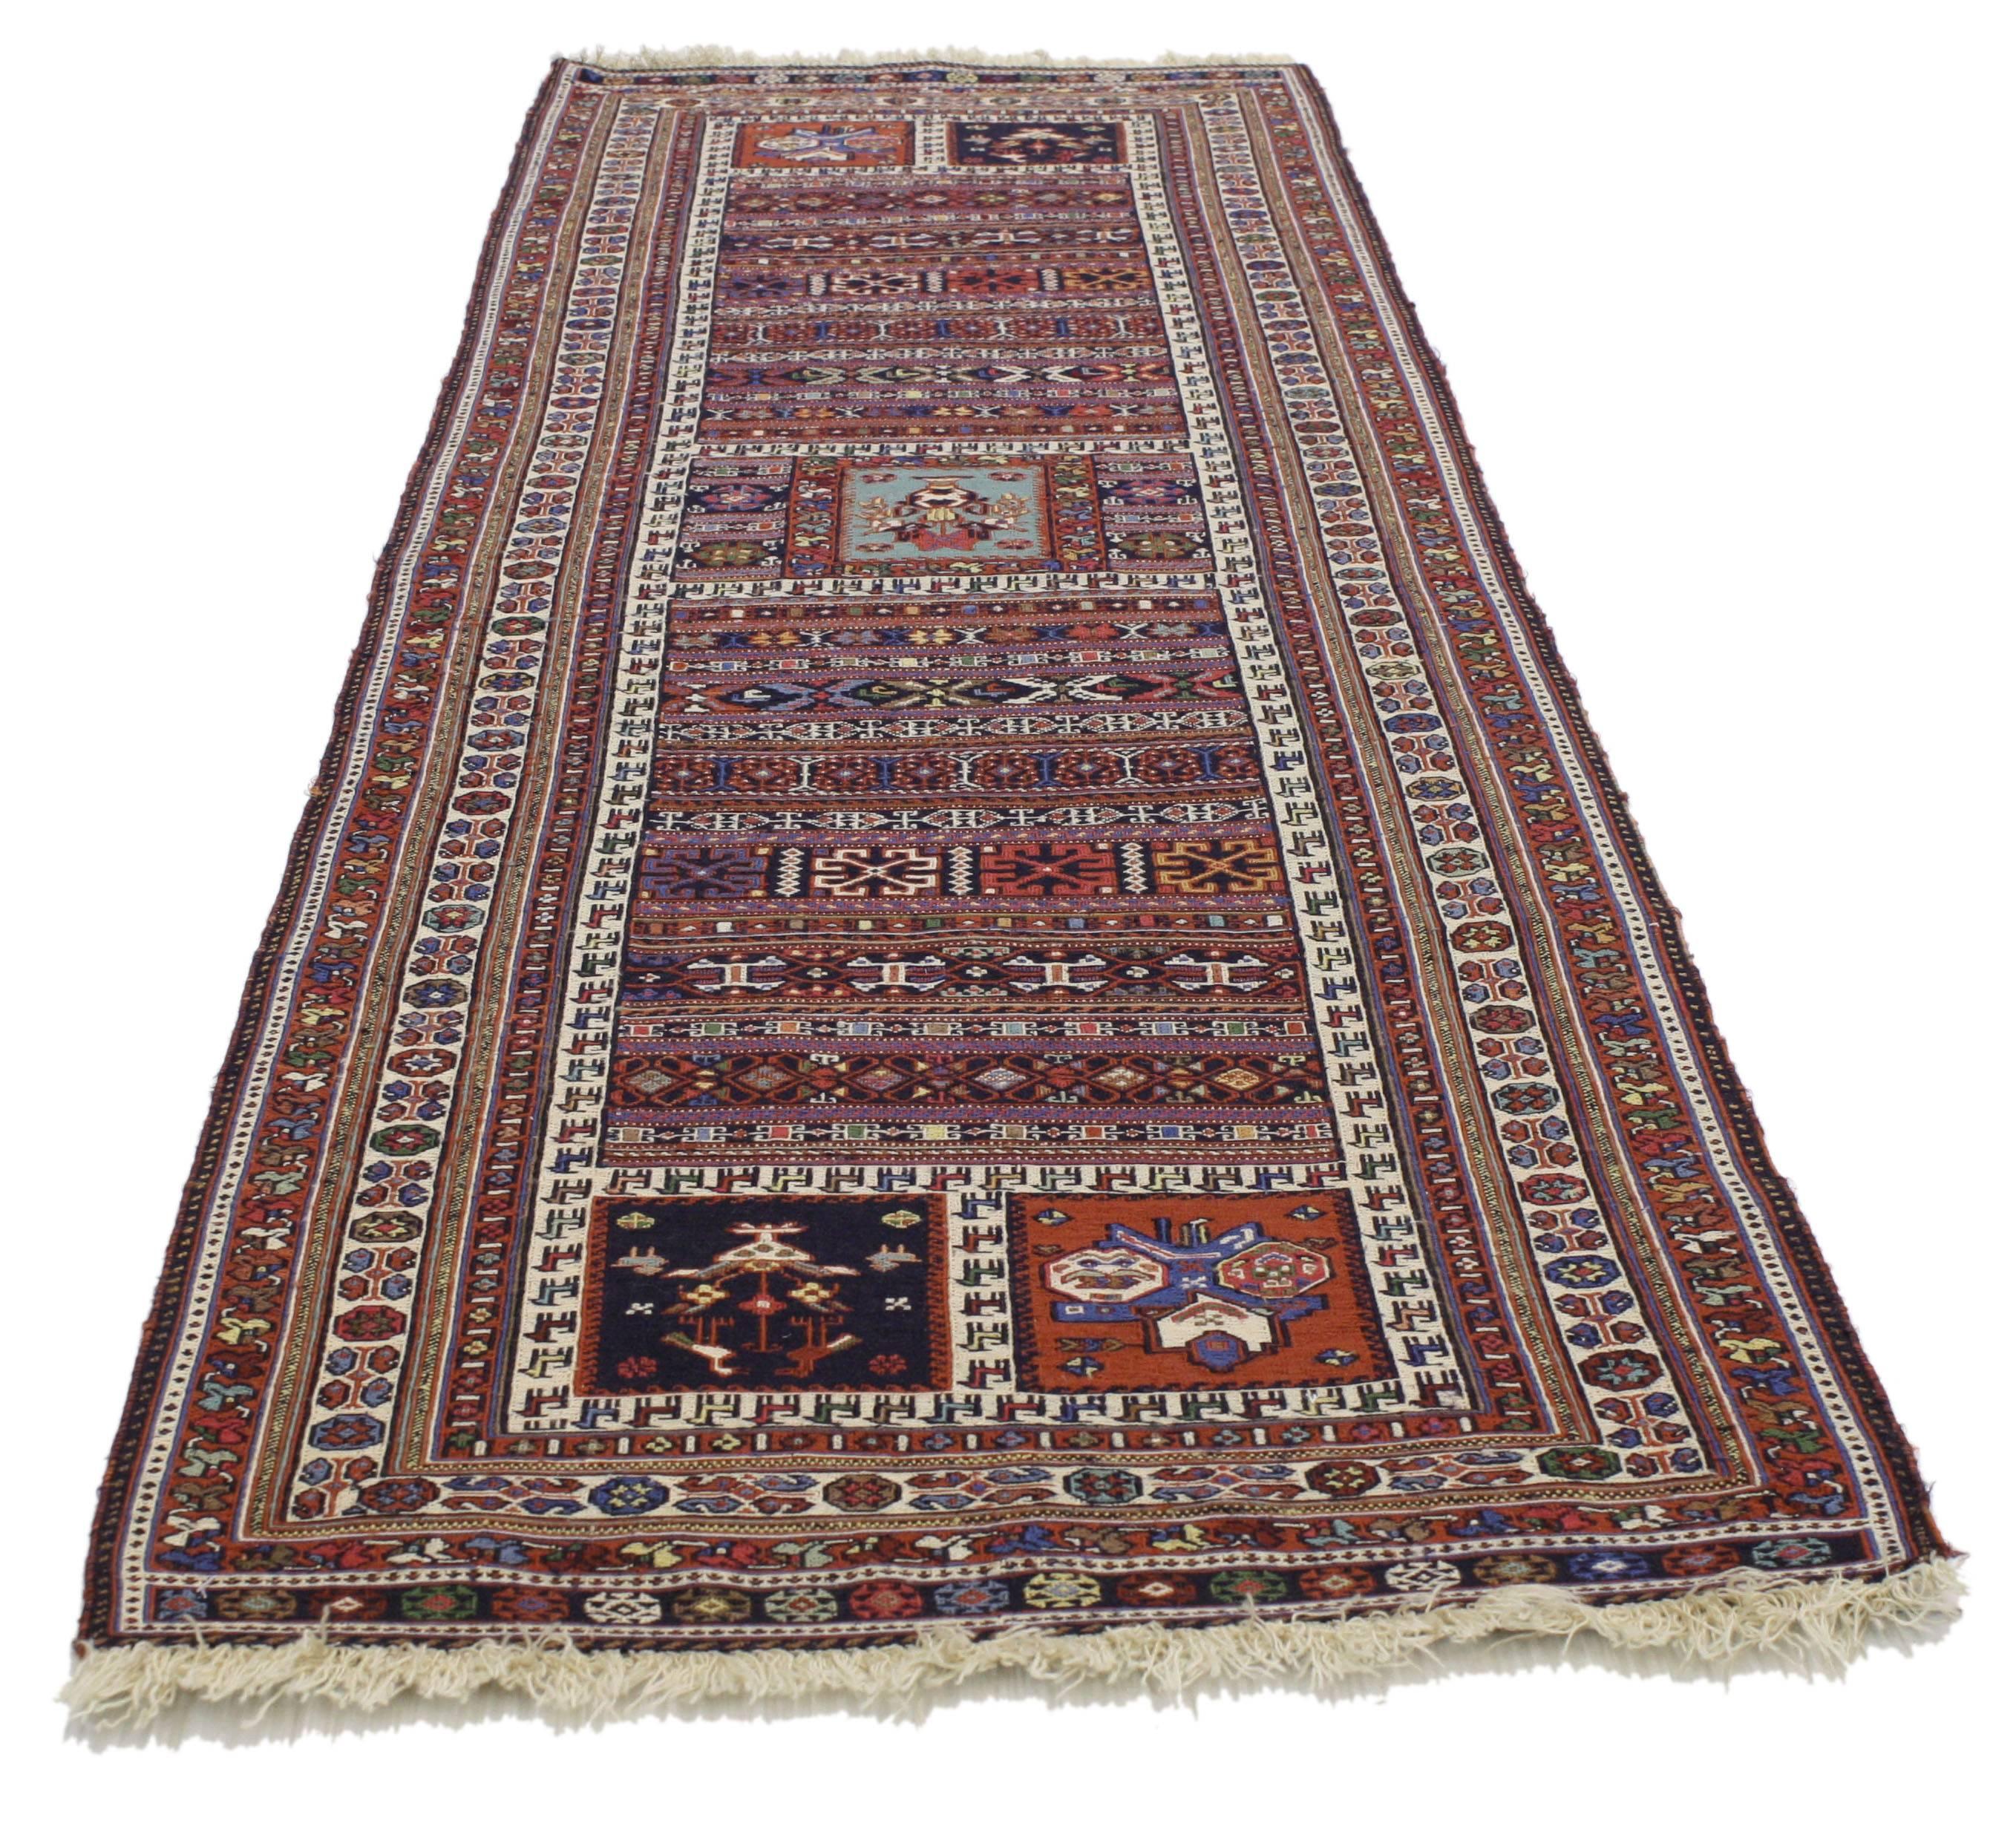 77002 Vintage Soumak Persian Runner With Tribal Style. This hand-woven vintage Persian Soumak runner features a compartment design composed of symbolic tribal motifs. It is enclosed with a series of guard bands. Perfect for a hallway, corridor,